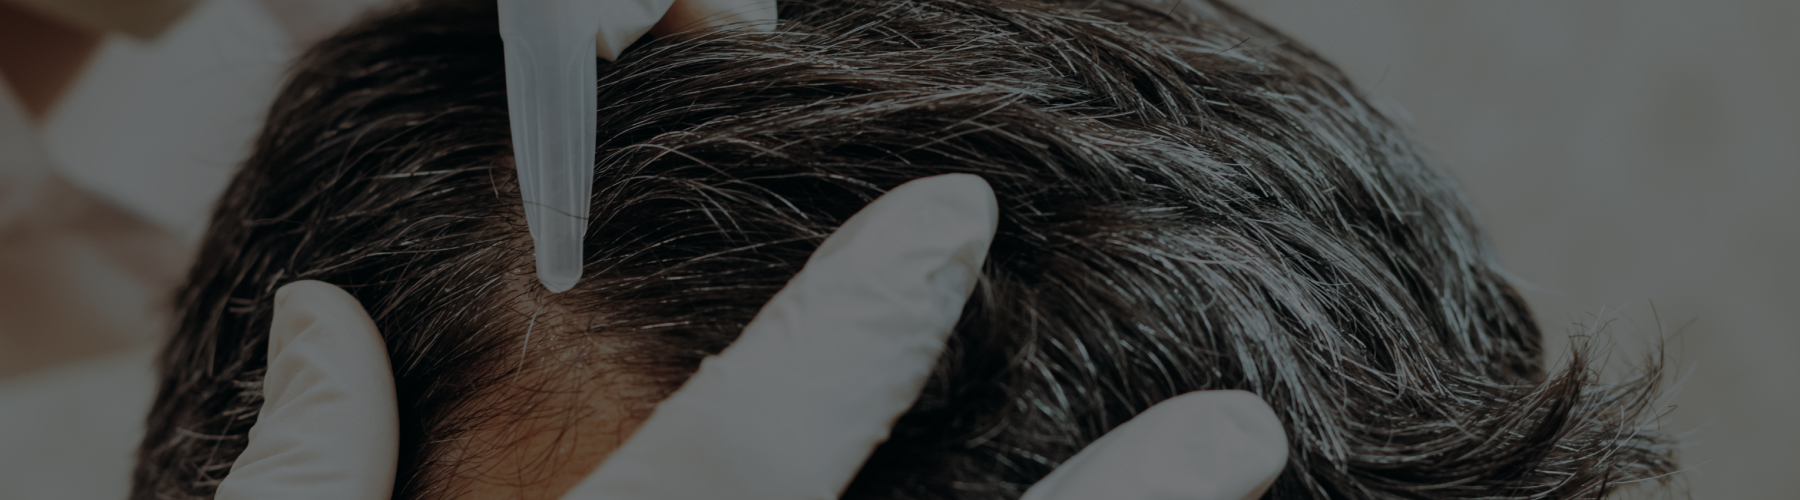 Types of Hair Transplant Techniques Which One is Right for You?